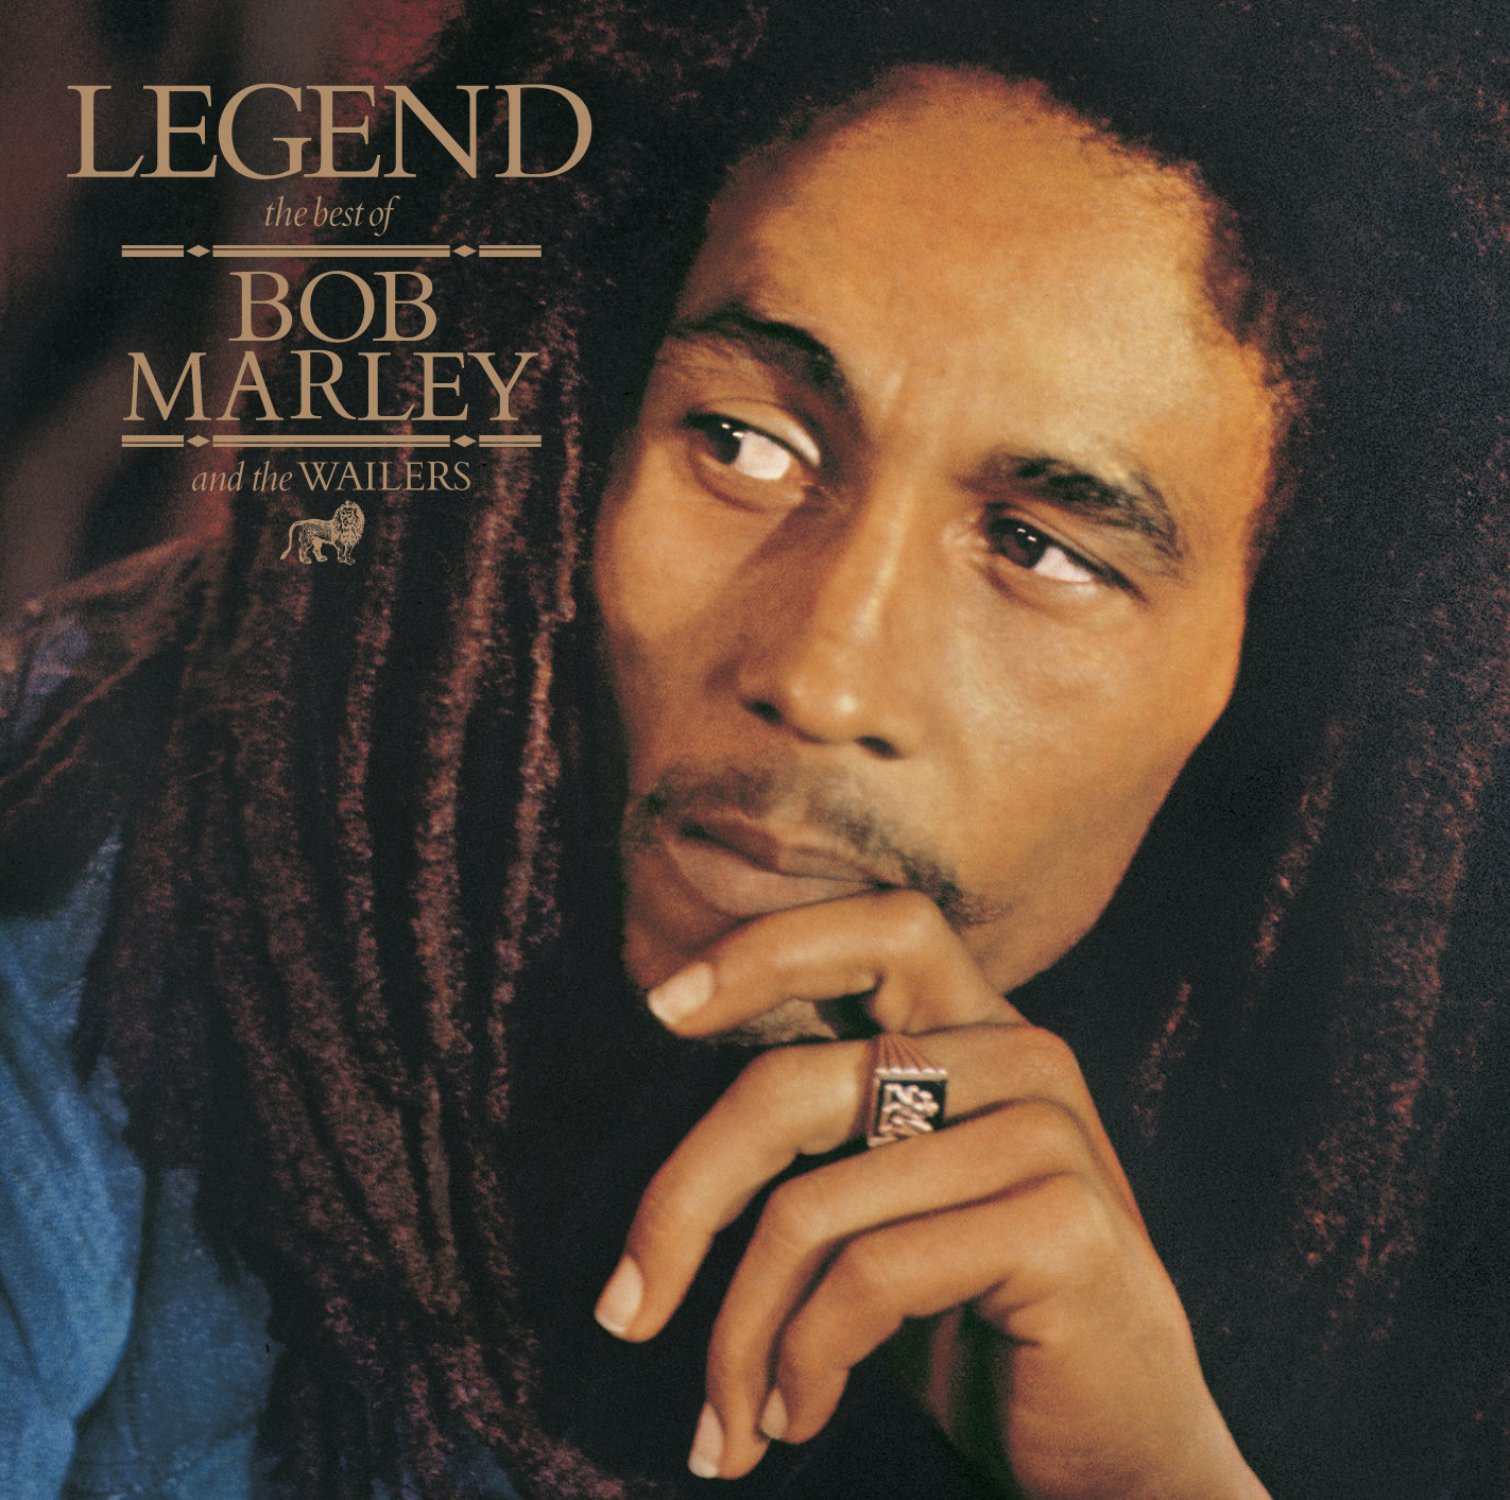 Bob Marley and the Wailers Legend Vinyl Review